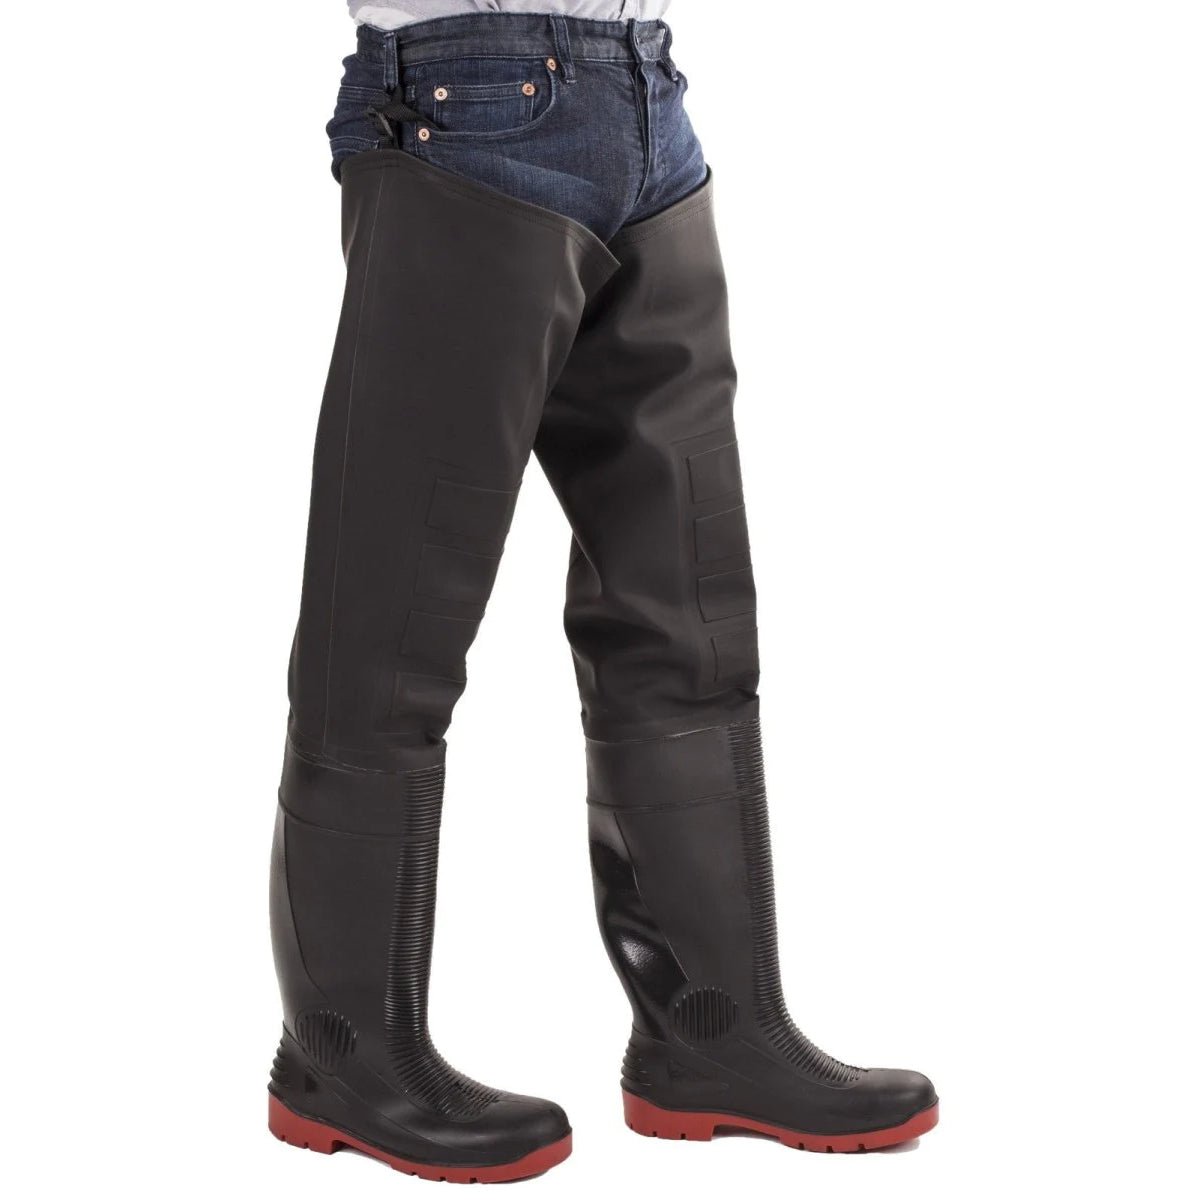 Amblers Rhone S5 Steel Toe Cap Thigh Safety Waders - Shoe Store Direct